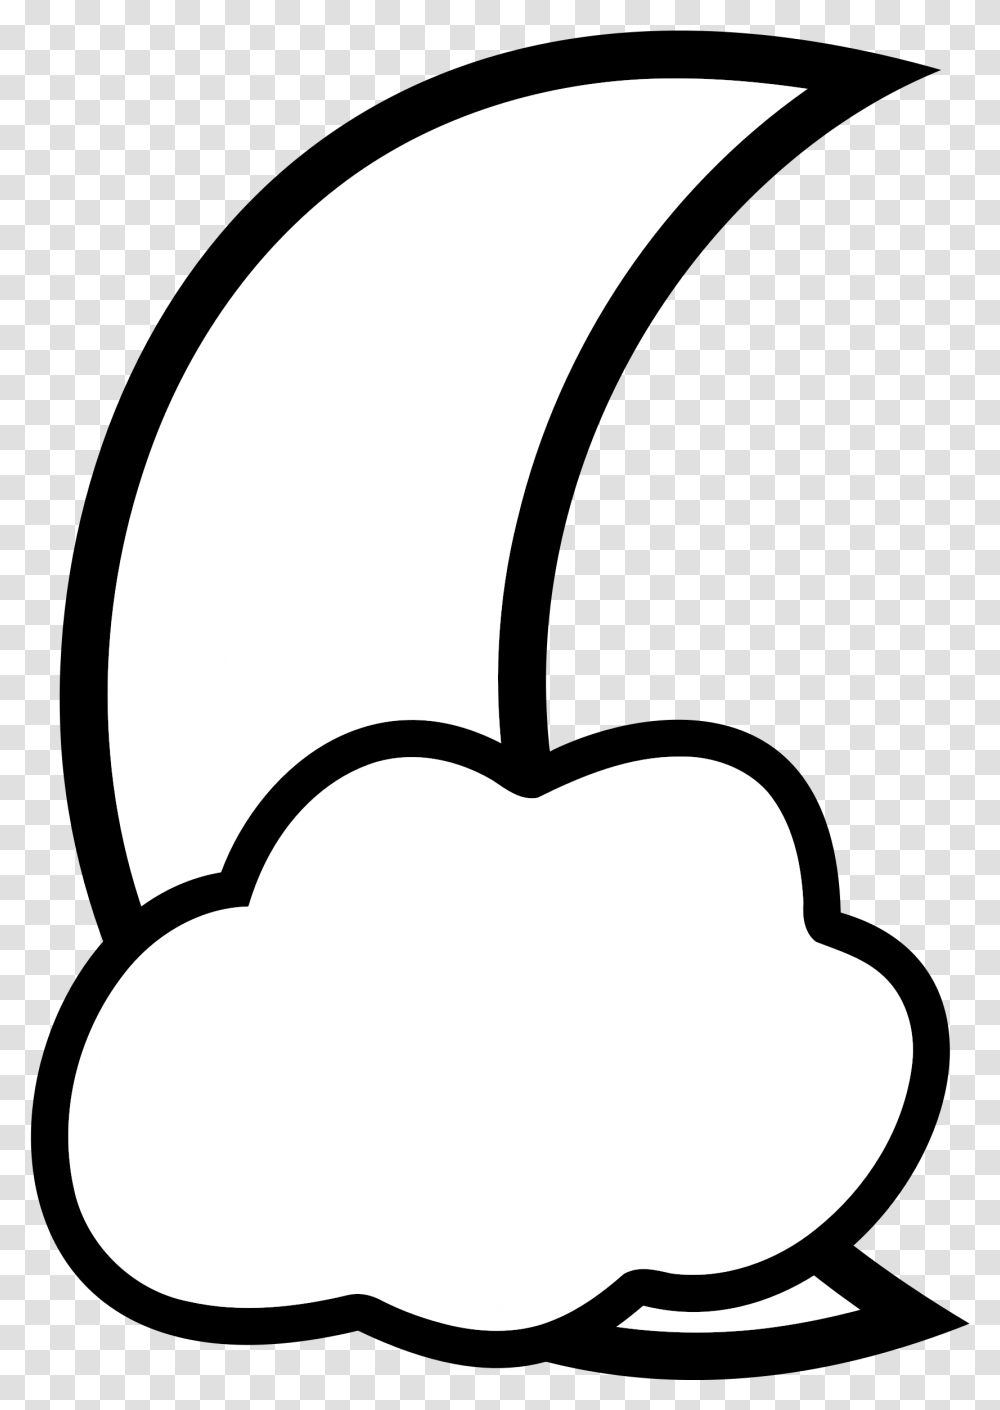 Moon Clipart Black And White Cloud Clipart Black And White A Moon, Cushion, Heart, Baseball Cap, Hat Transparent Png